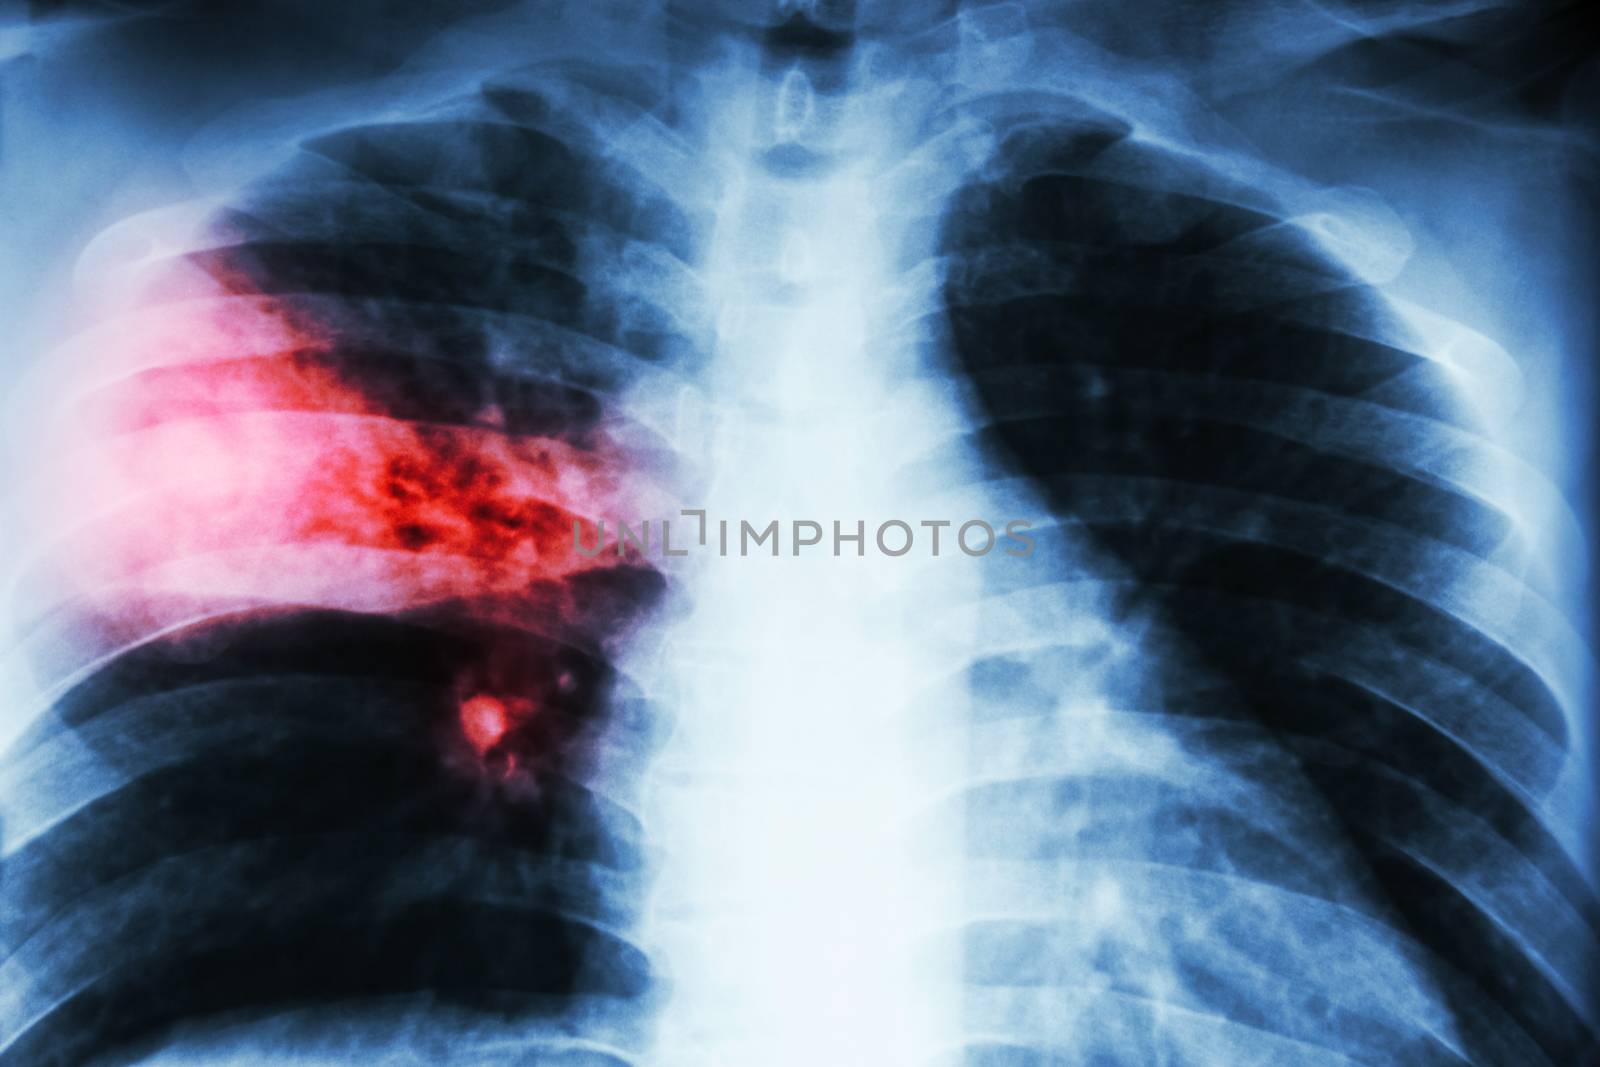 Lobar pneumonia . film chest x-ray show alveolar infiltration at right middle lobe due to tuberculosis infection .